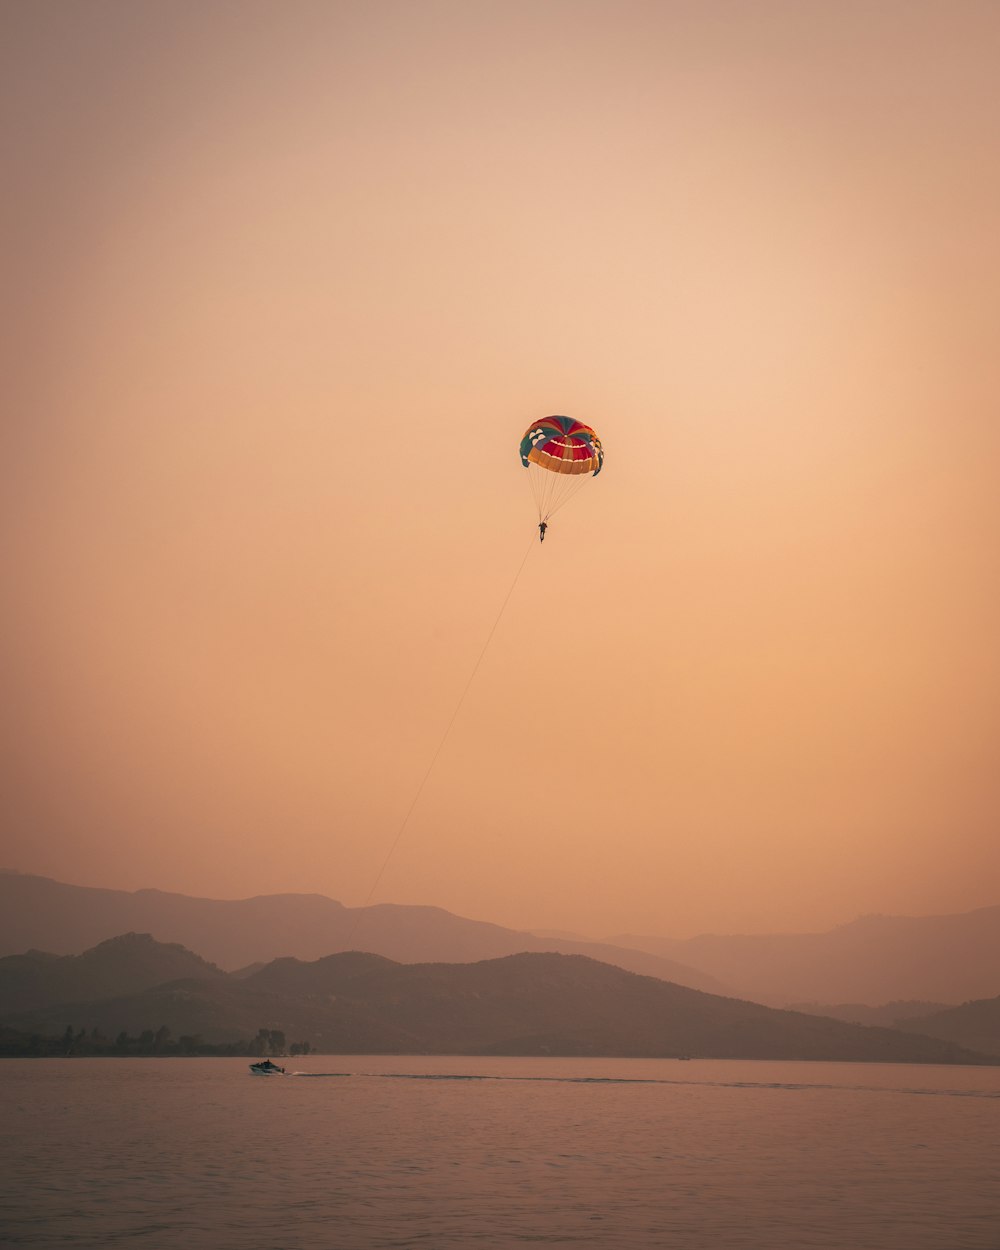 red and white parachute over the mountains during sunset